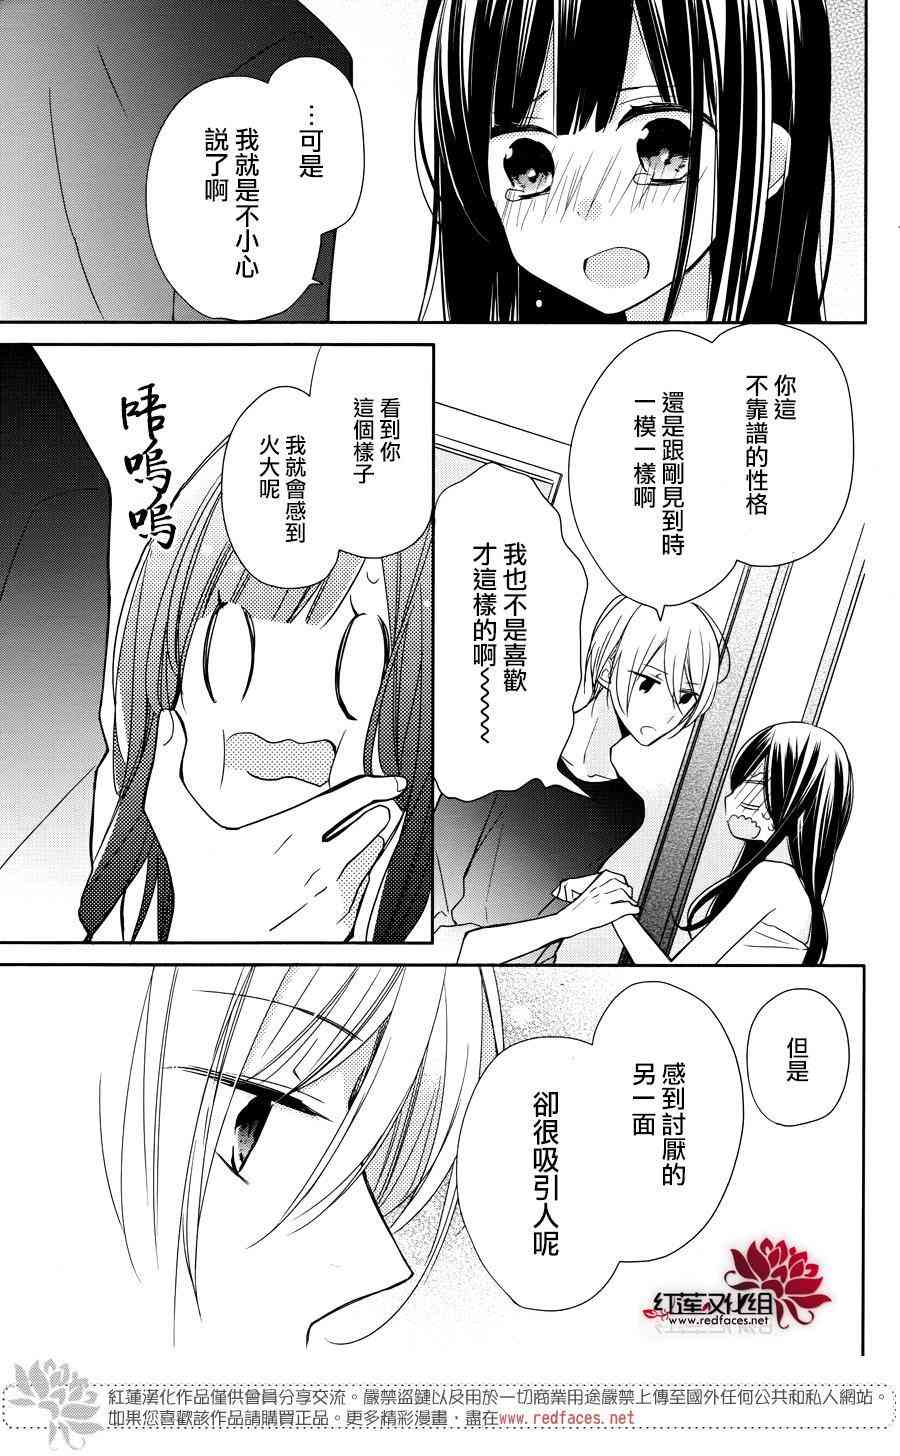 If given a second chance - 4話 - 1